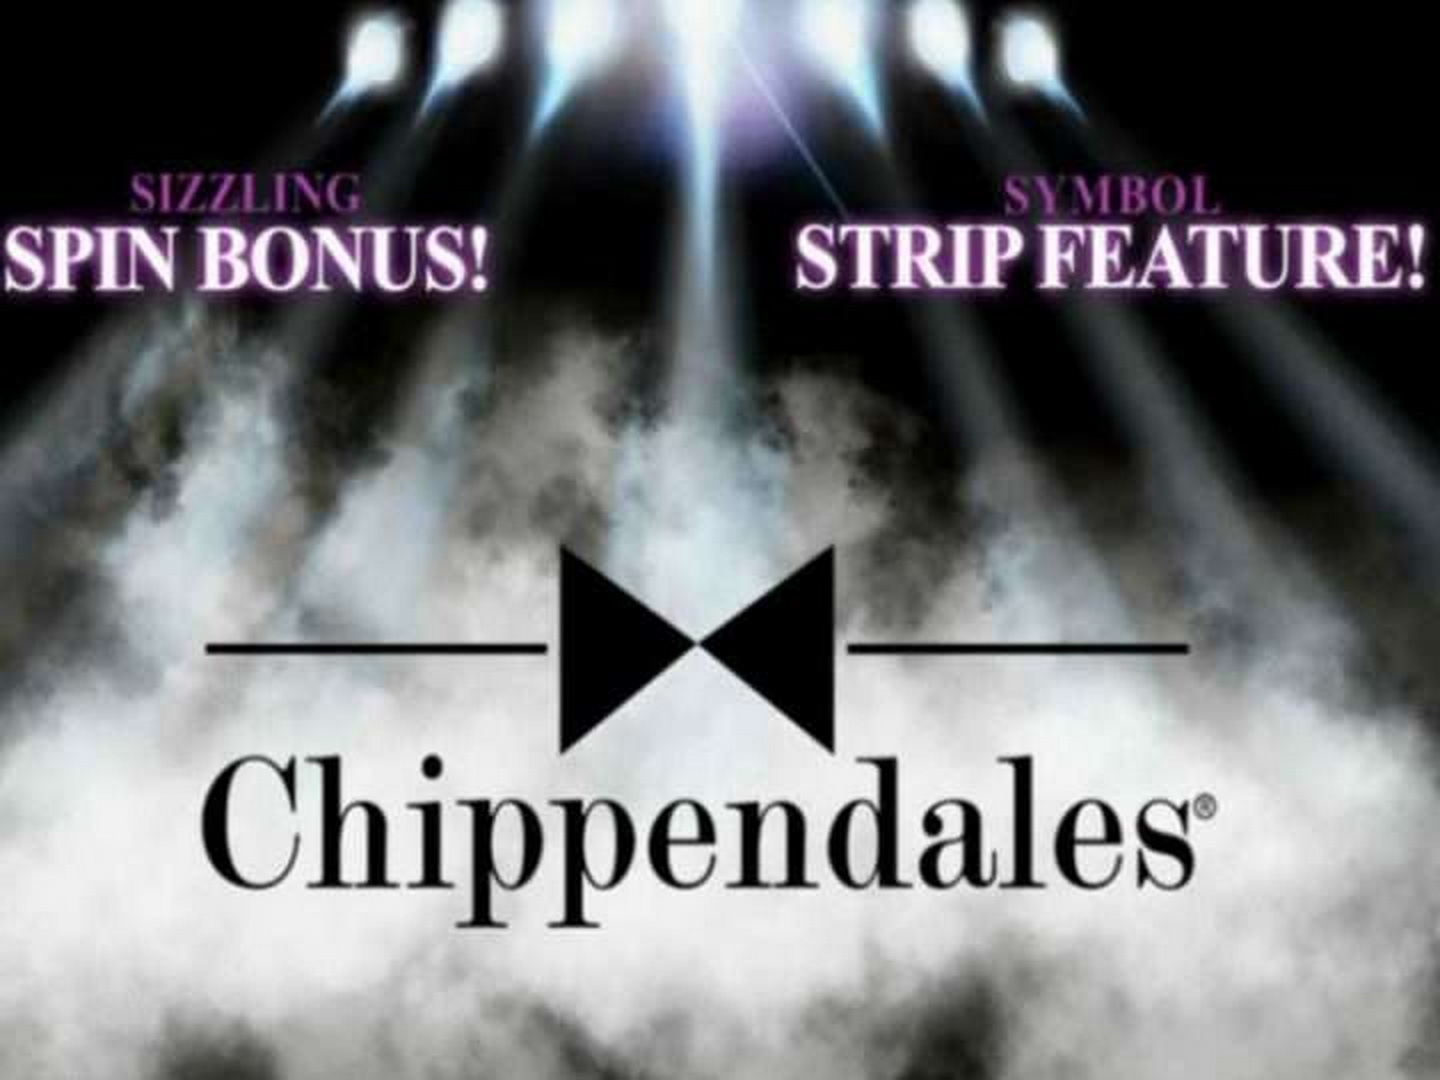 Chippendales demo